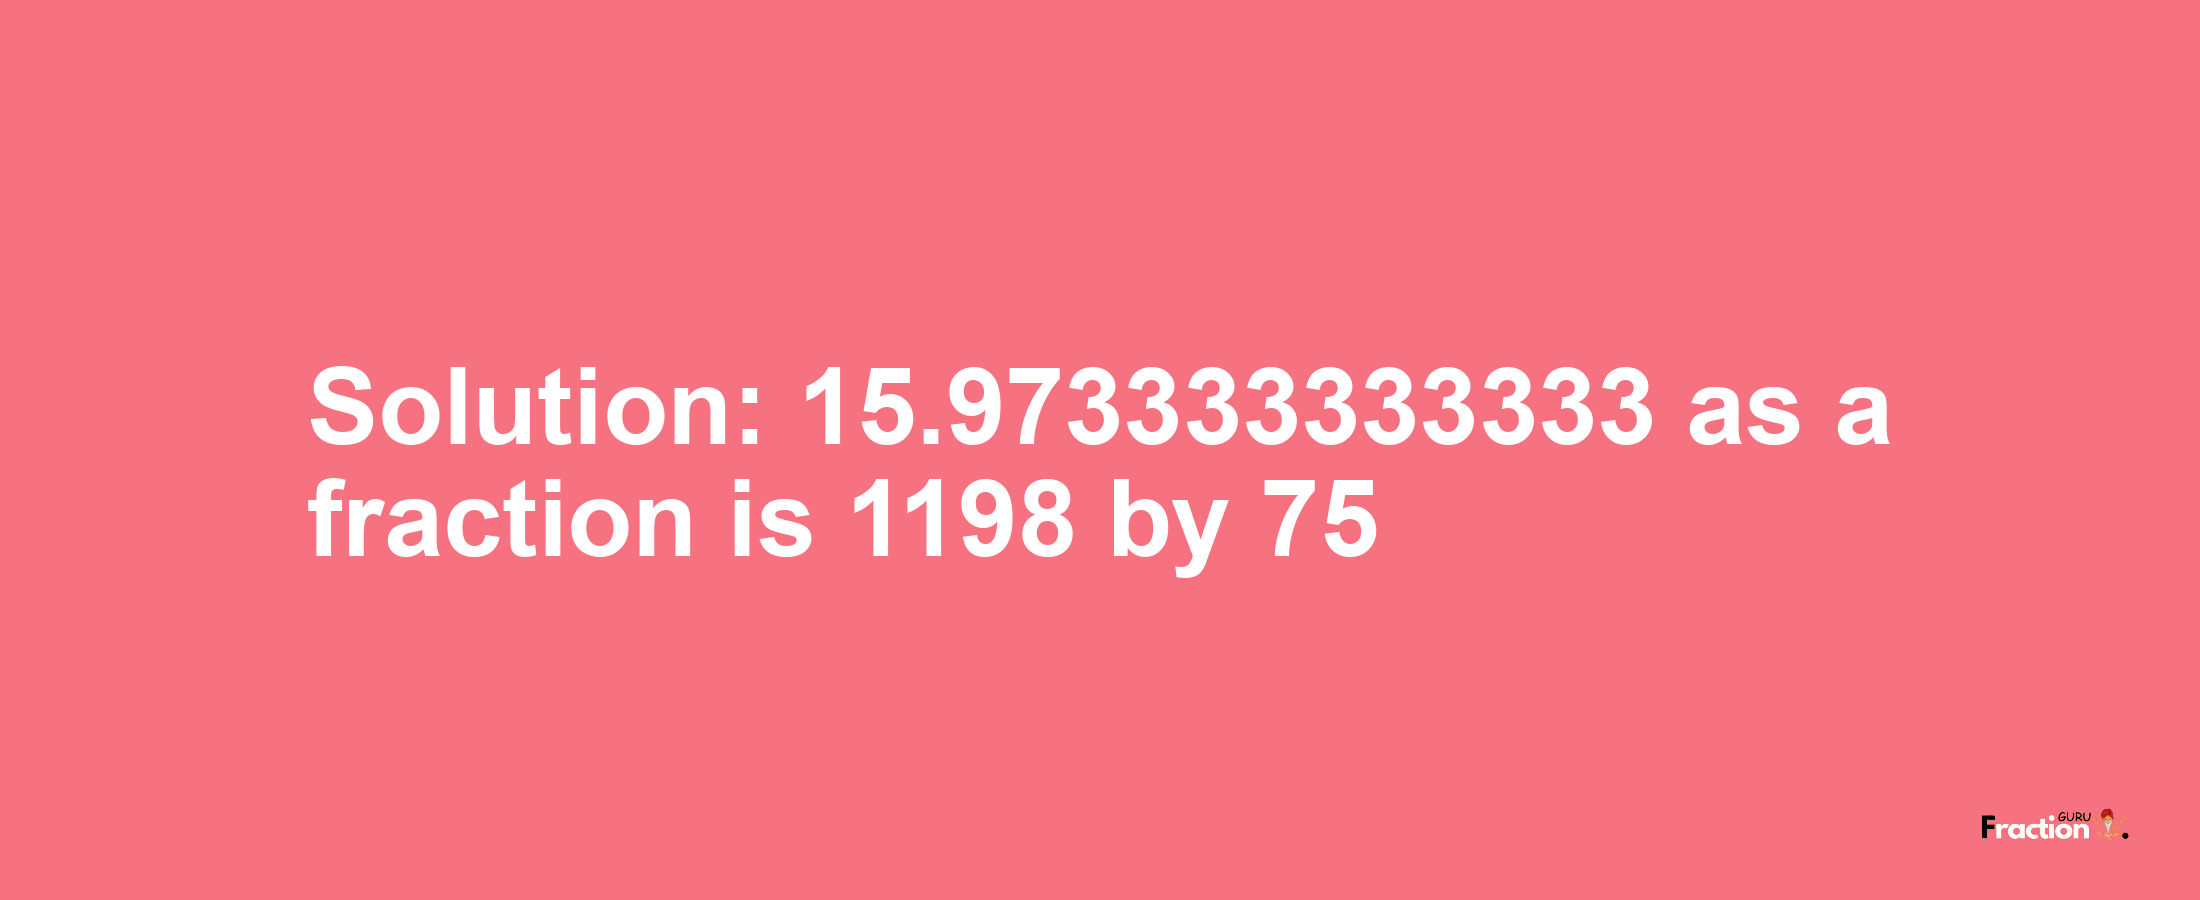 Solution:15.973333333333 as a fraction is 1198/75